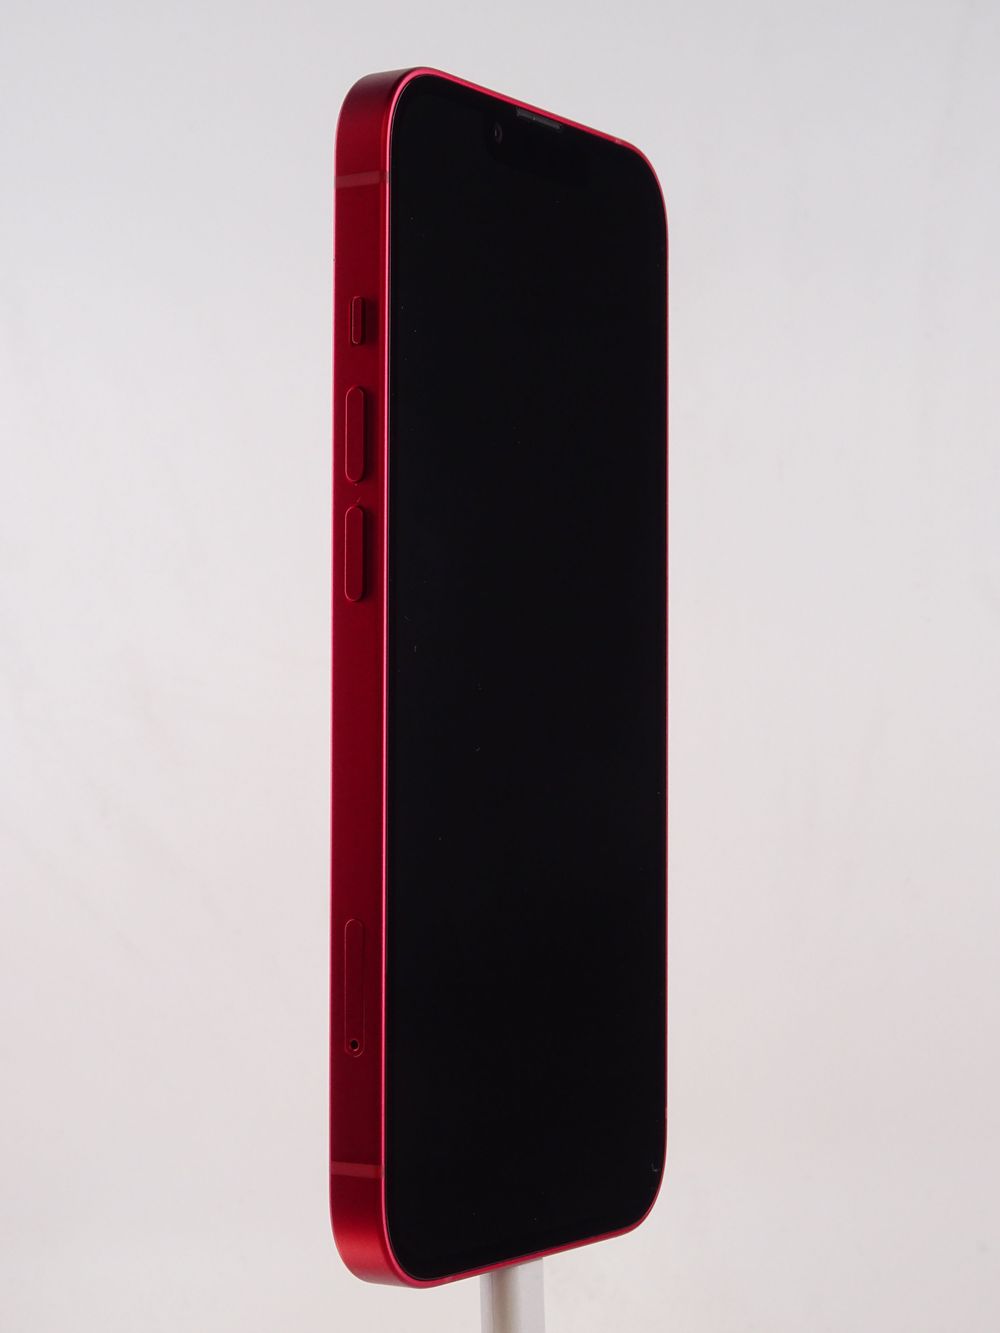 Telefon mobil Apple iPhone 13, Red, 128 GB,  Excelent